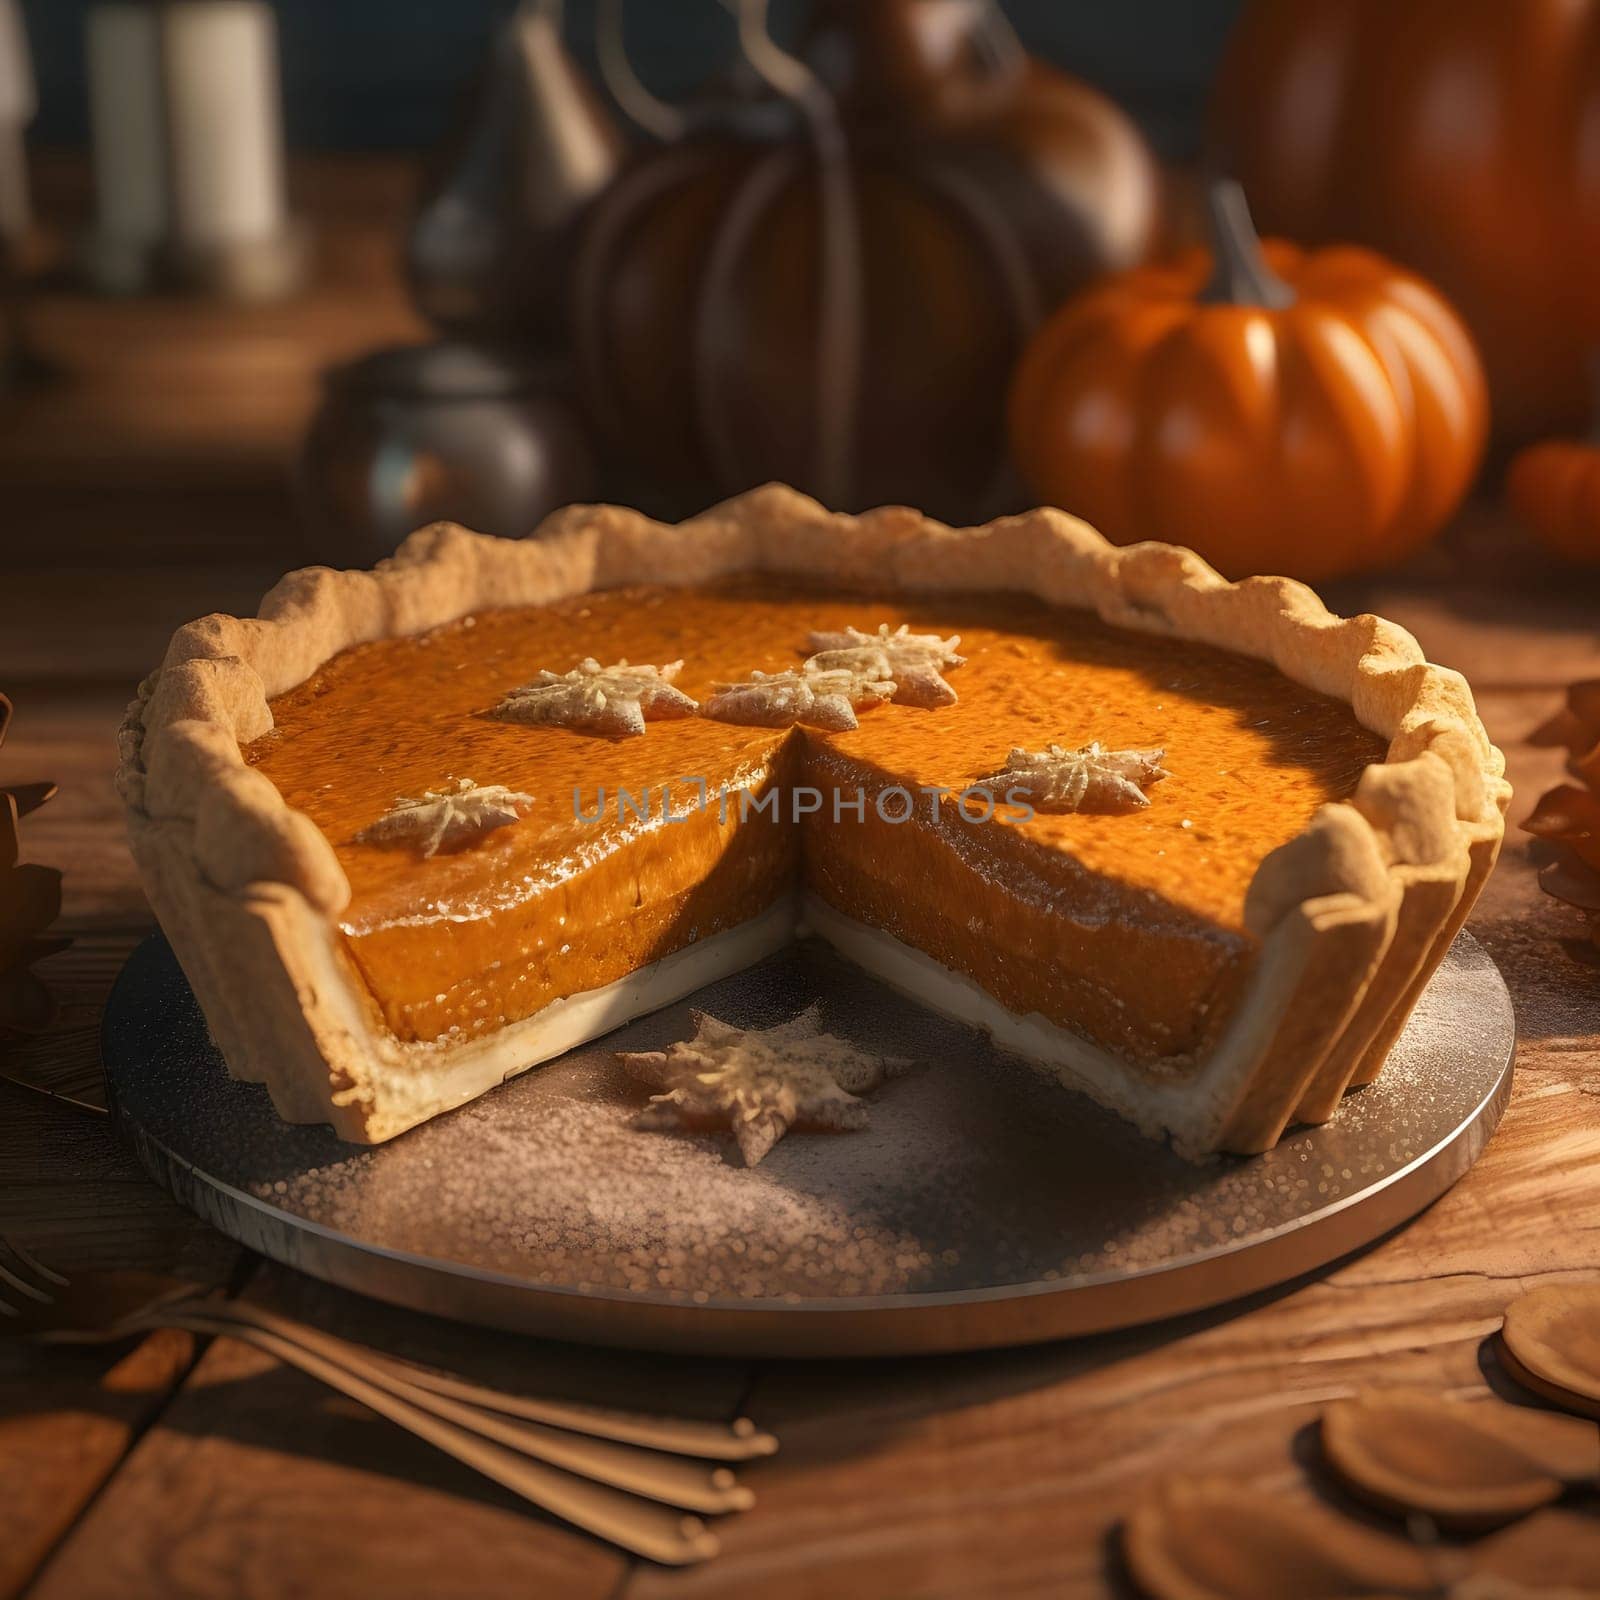 Pumpkin cake with stars, smeared pumpkins in the background. Pumpkin as a dish of thanksgiving for the harvest. by ThemesS